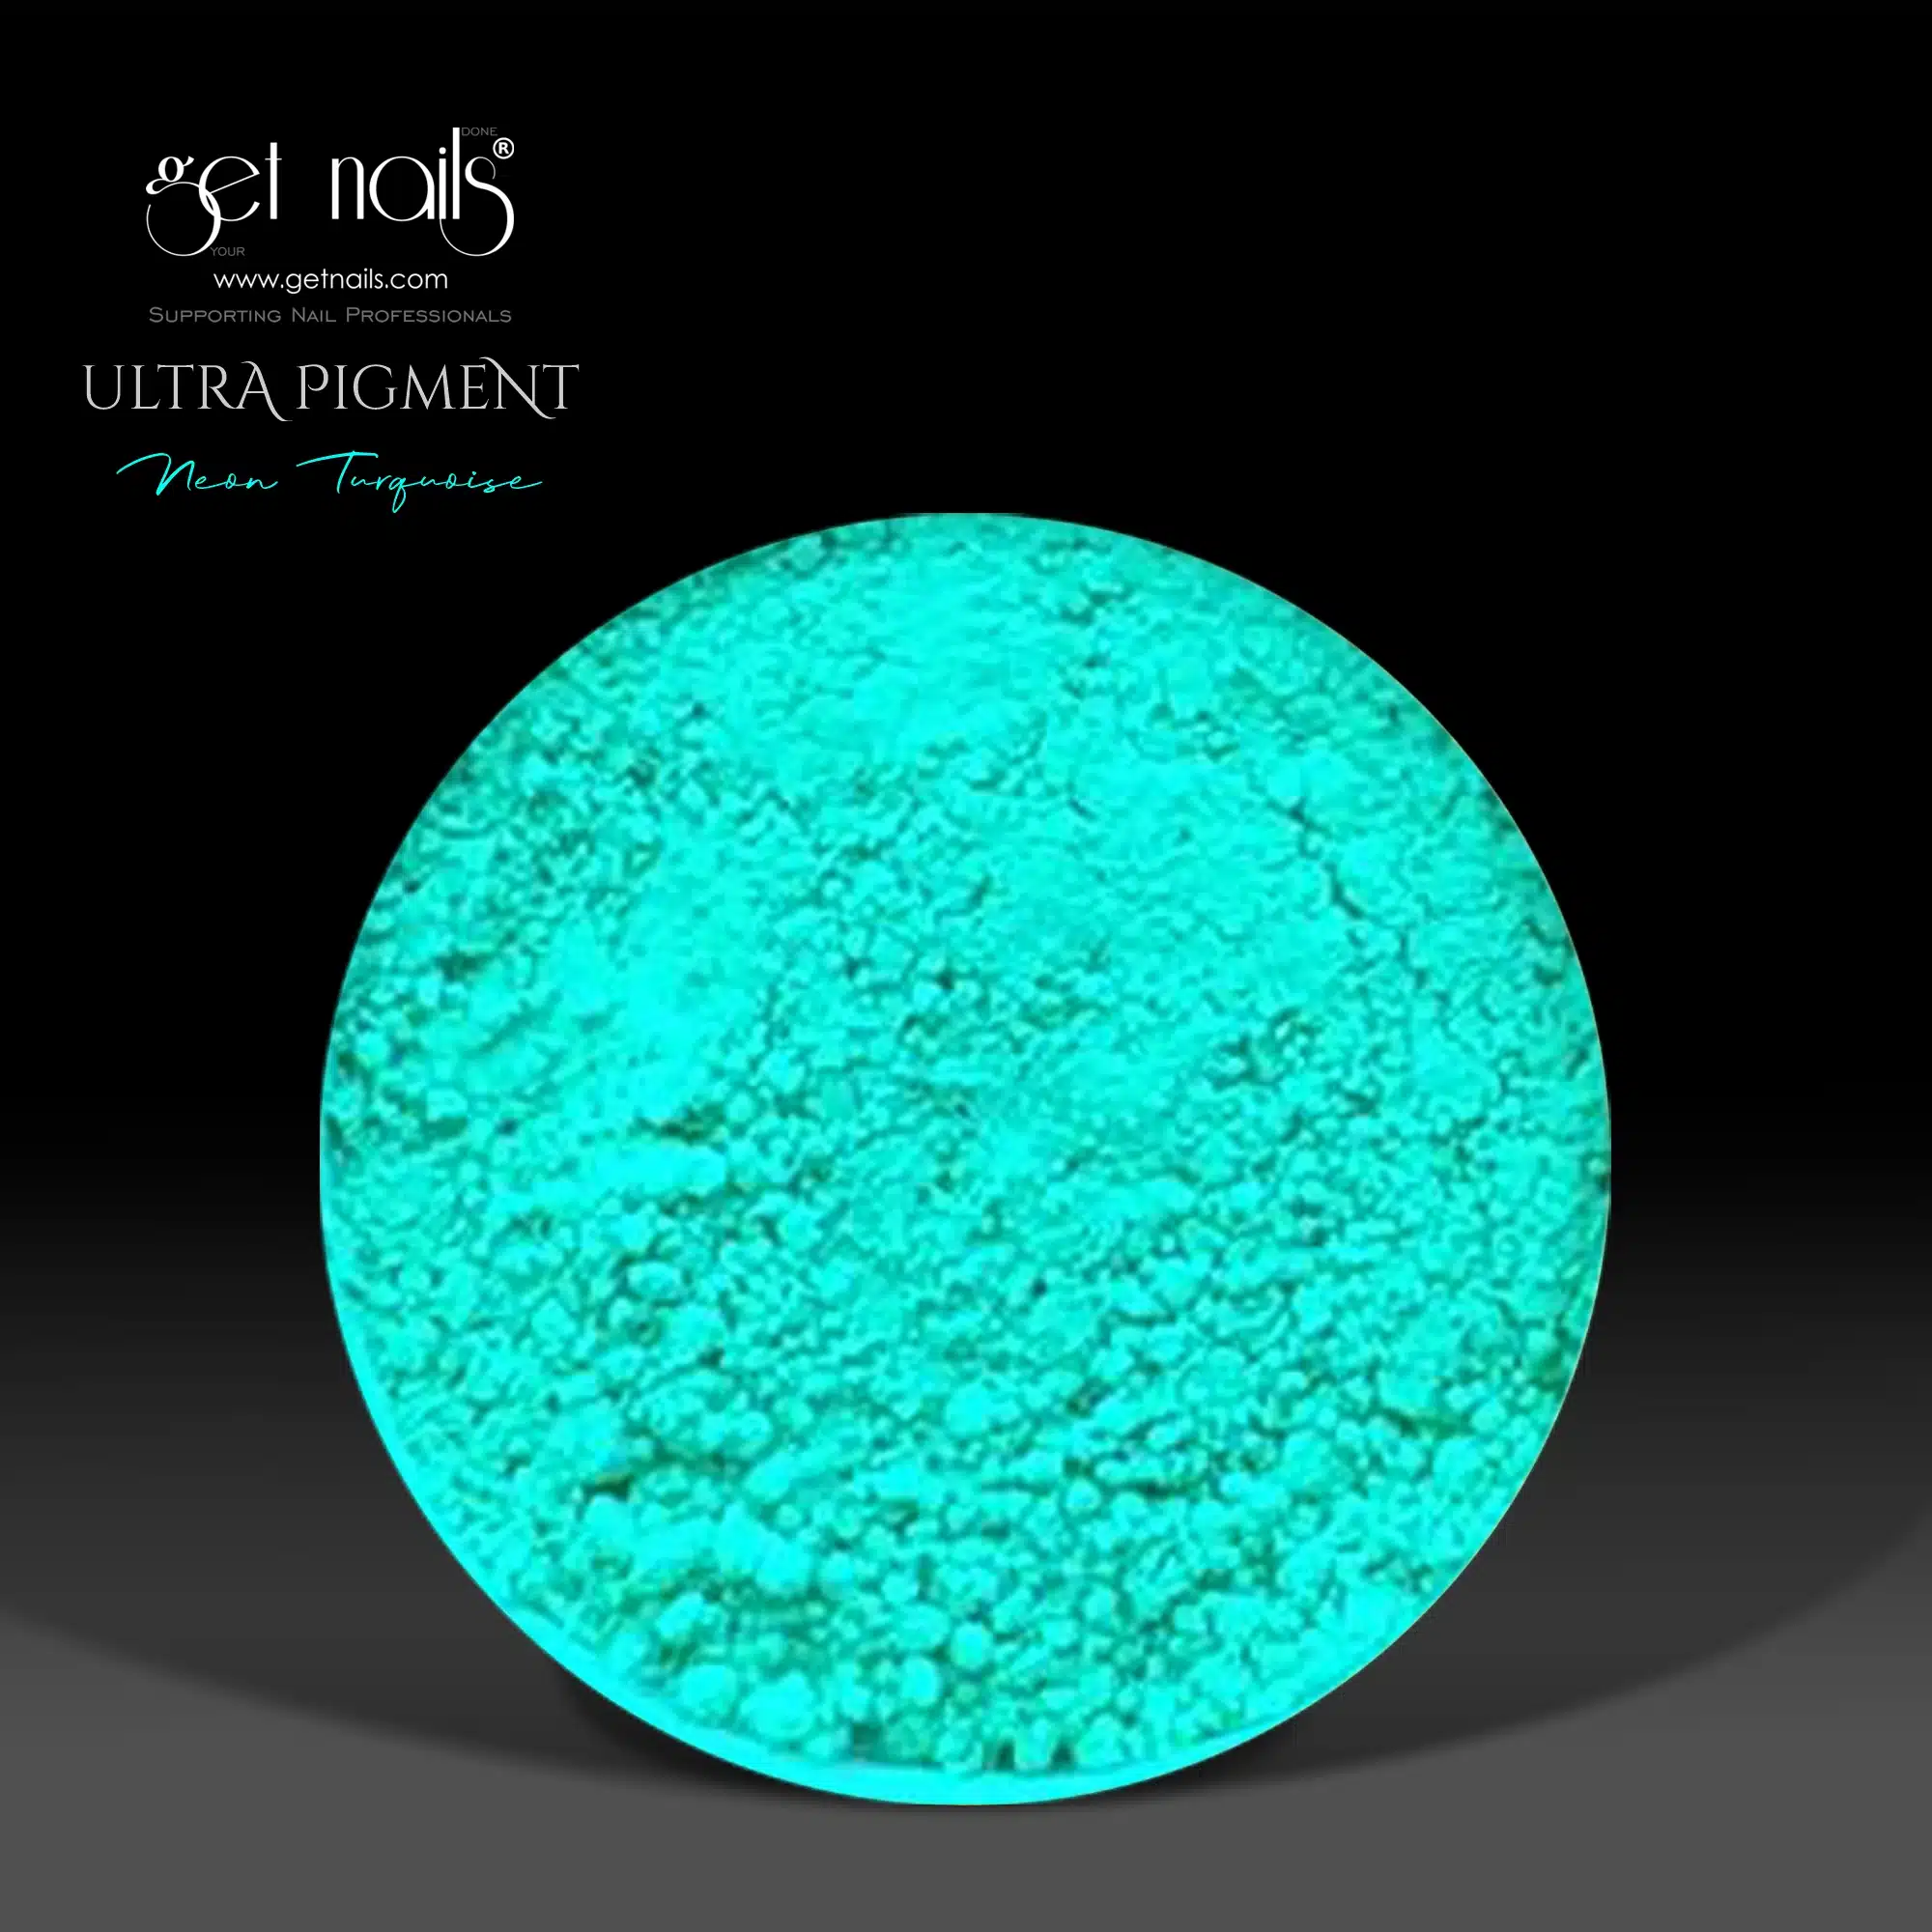 Get Nails Austria - Ultra Pigment Neon Turquoise 1.5g